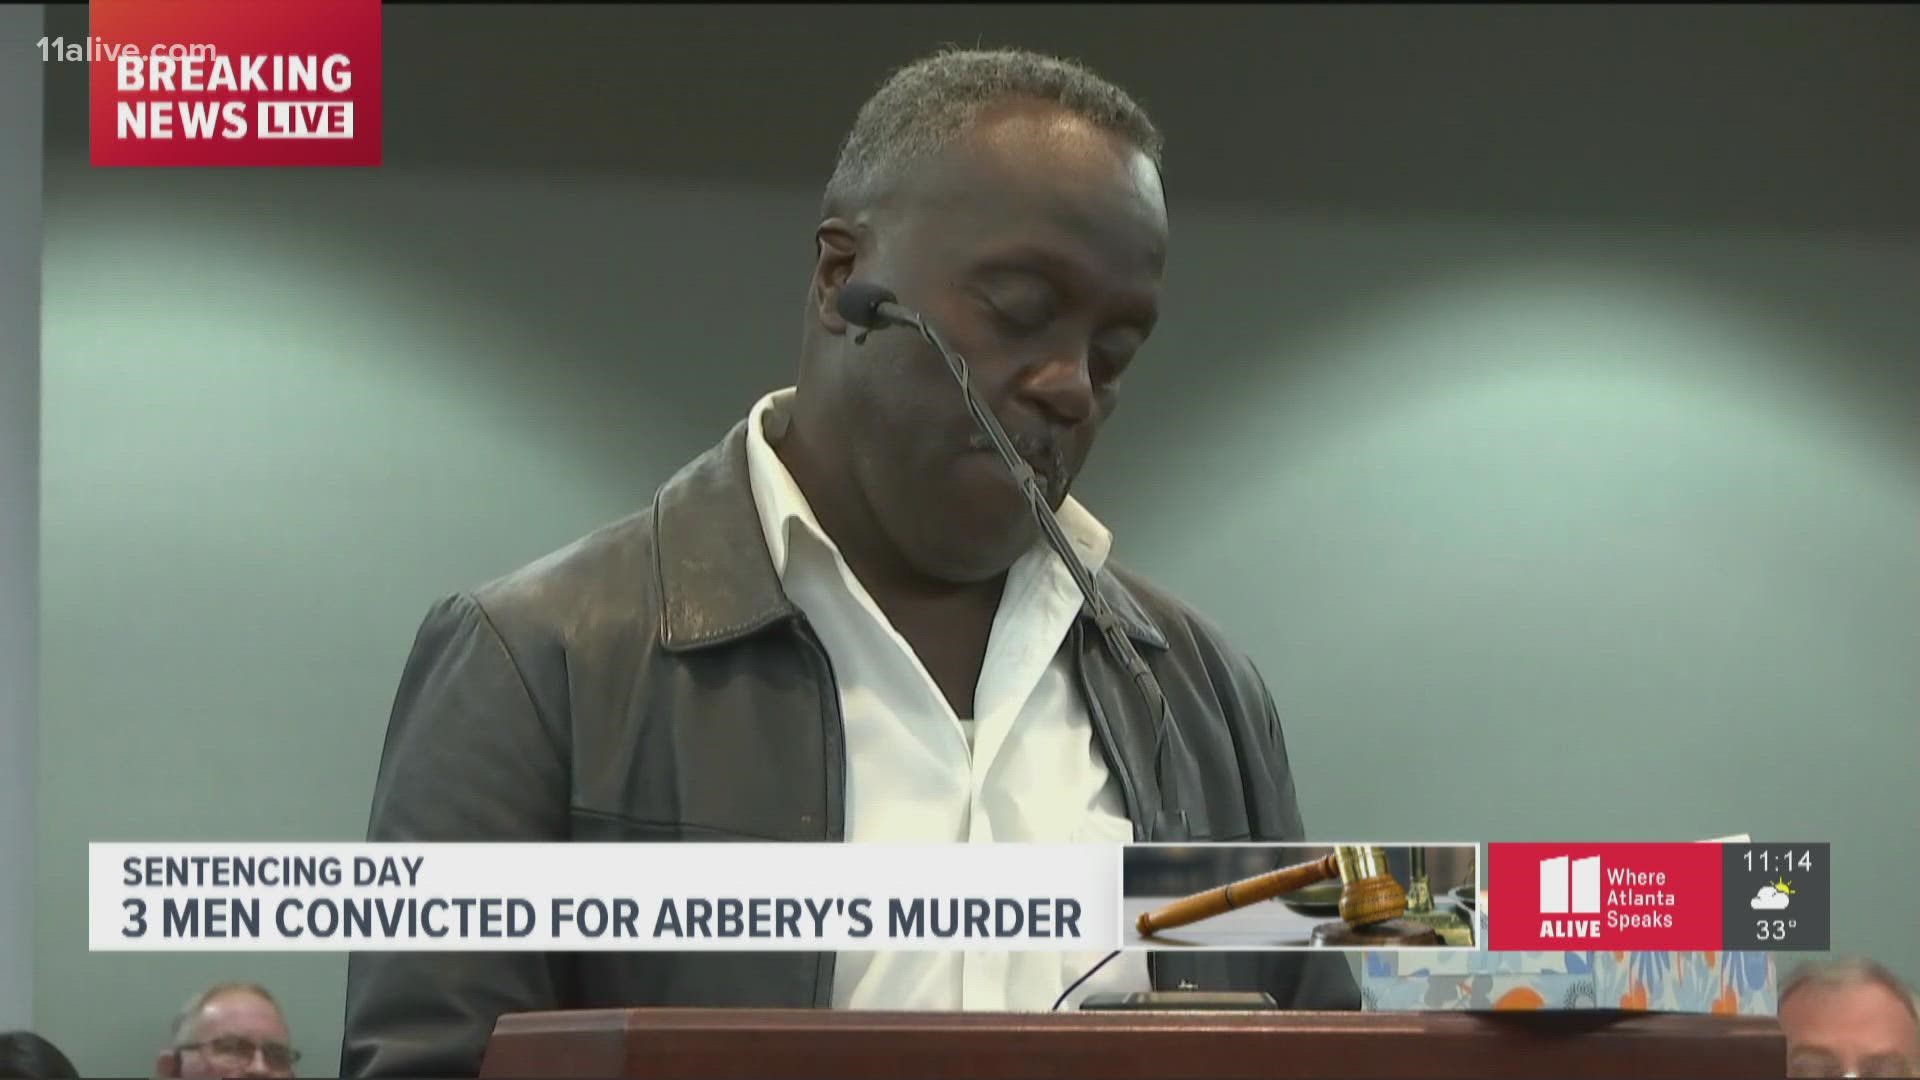 The three men convicted of murdering Ahmaud Arbery will be sentenced in Glynn County Friday.